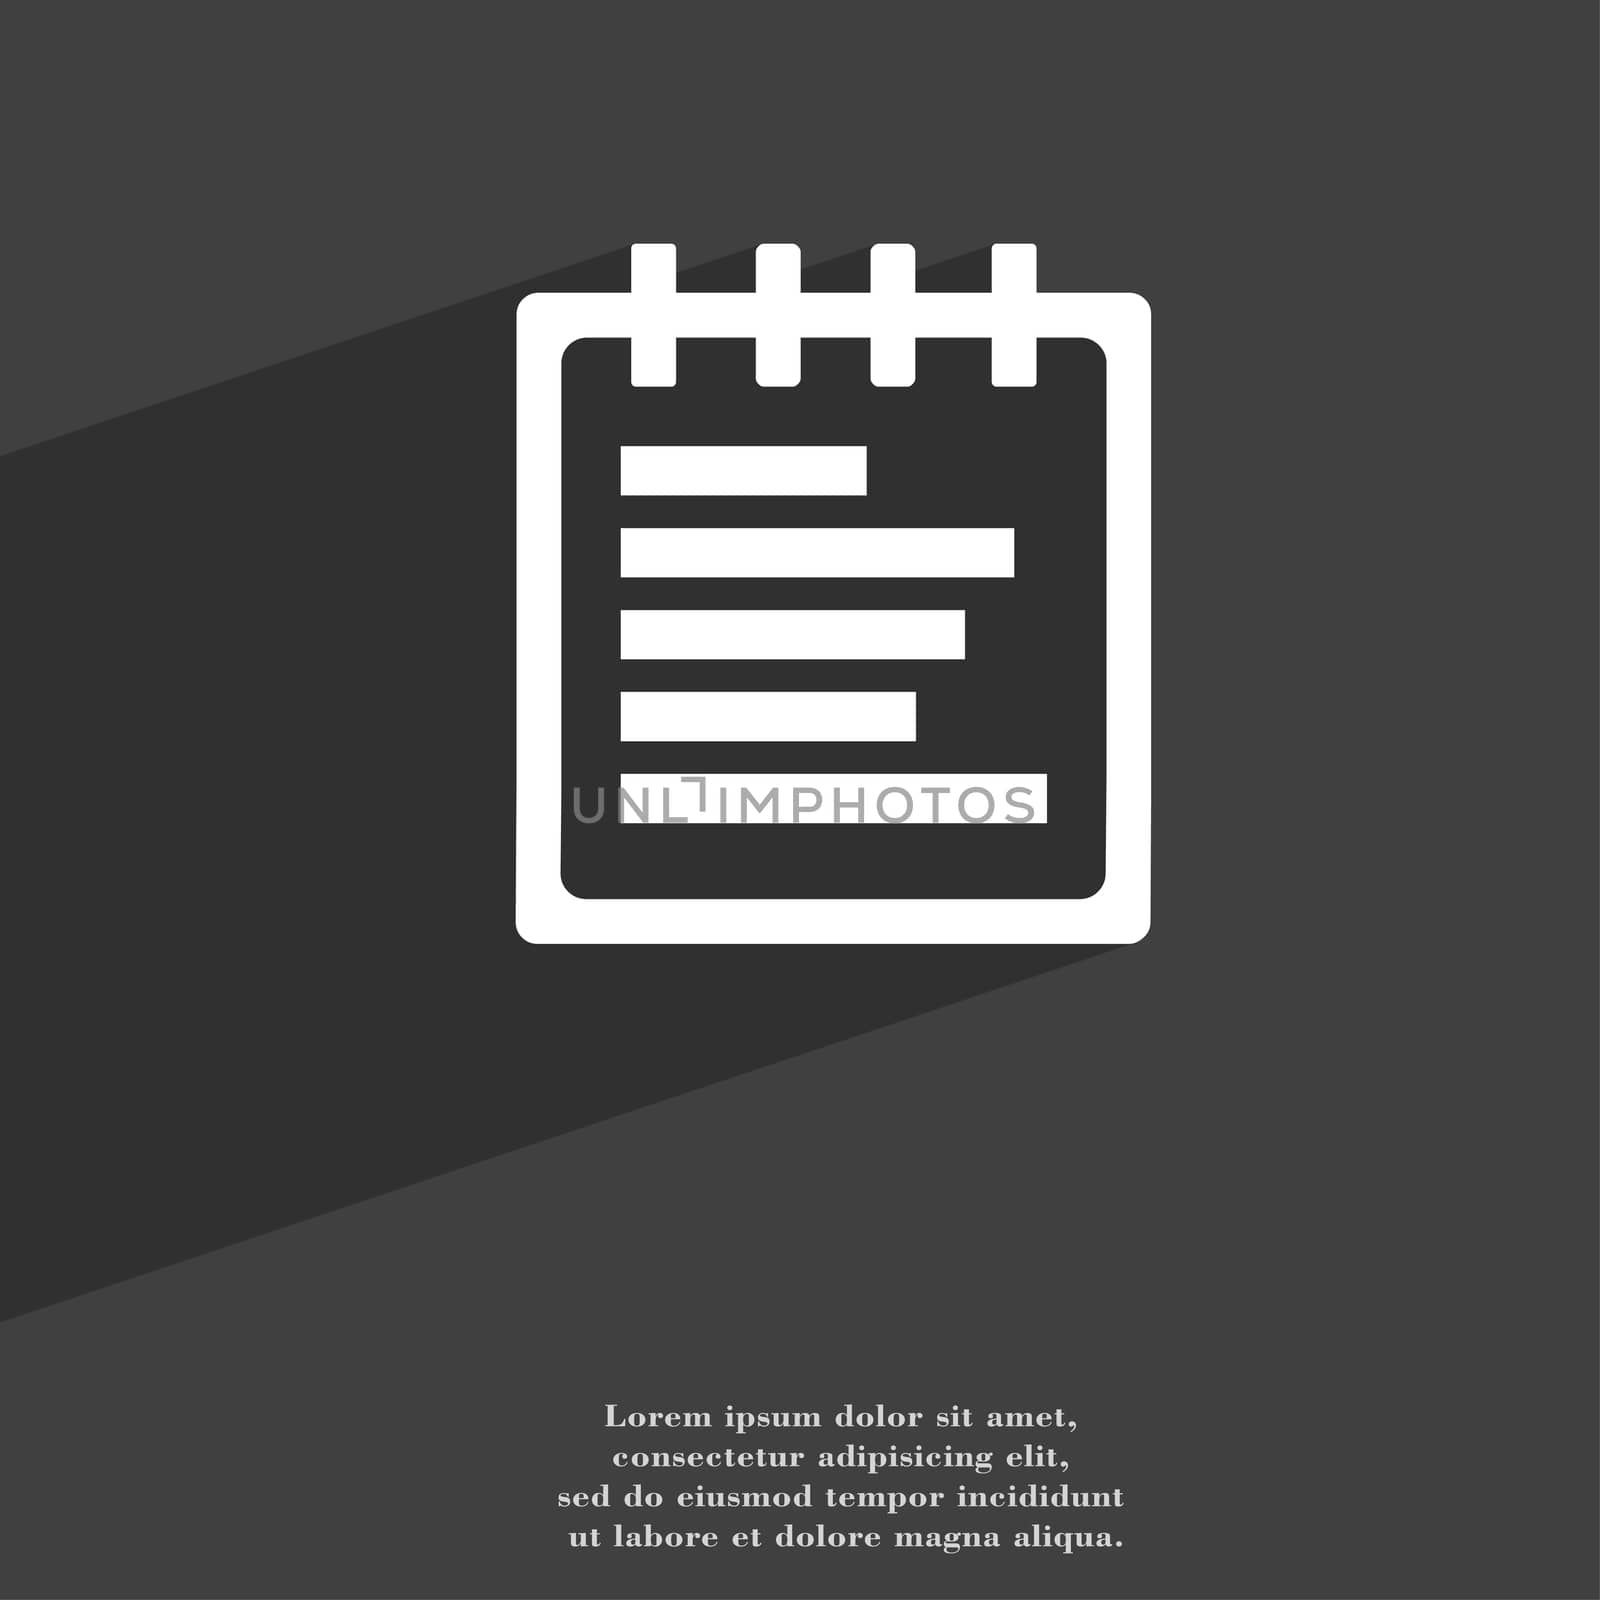 Notepad icon symbol Flat modern web design with long shadow and space for your text. illustration